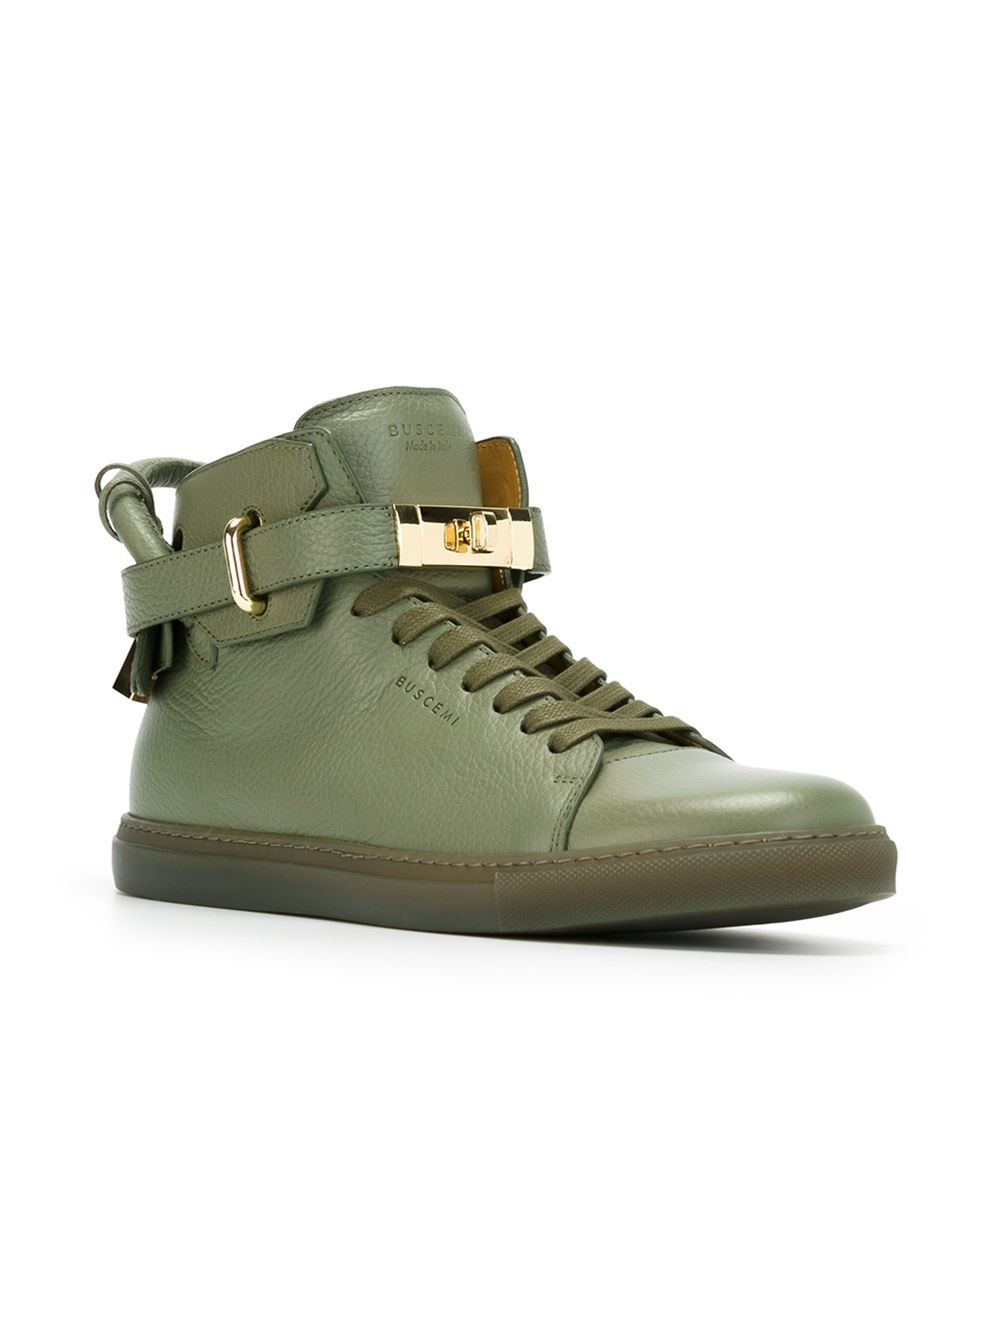 Buscemi Padlock-Detail Leather Sneakers in Green for Men | Lyst